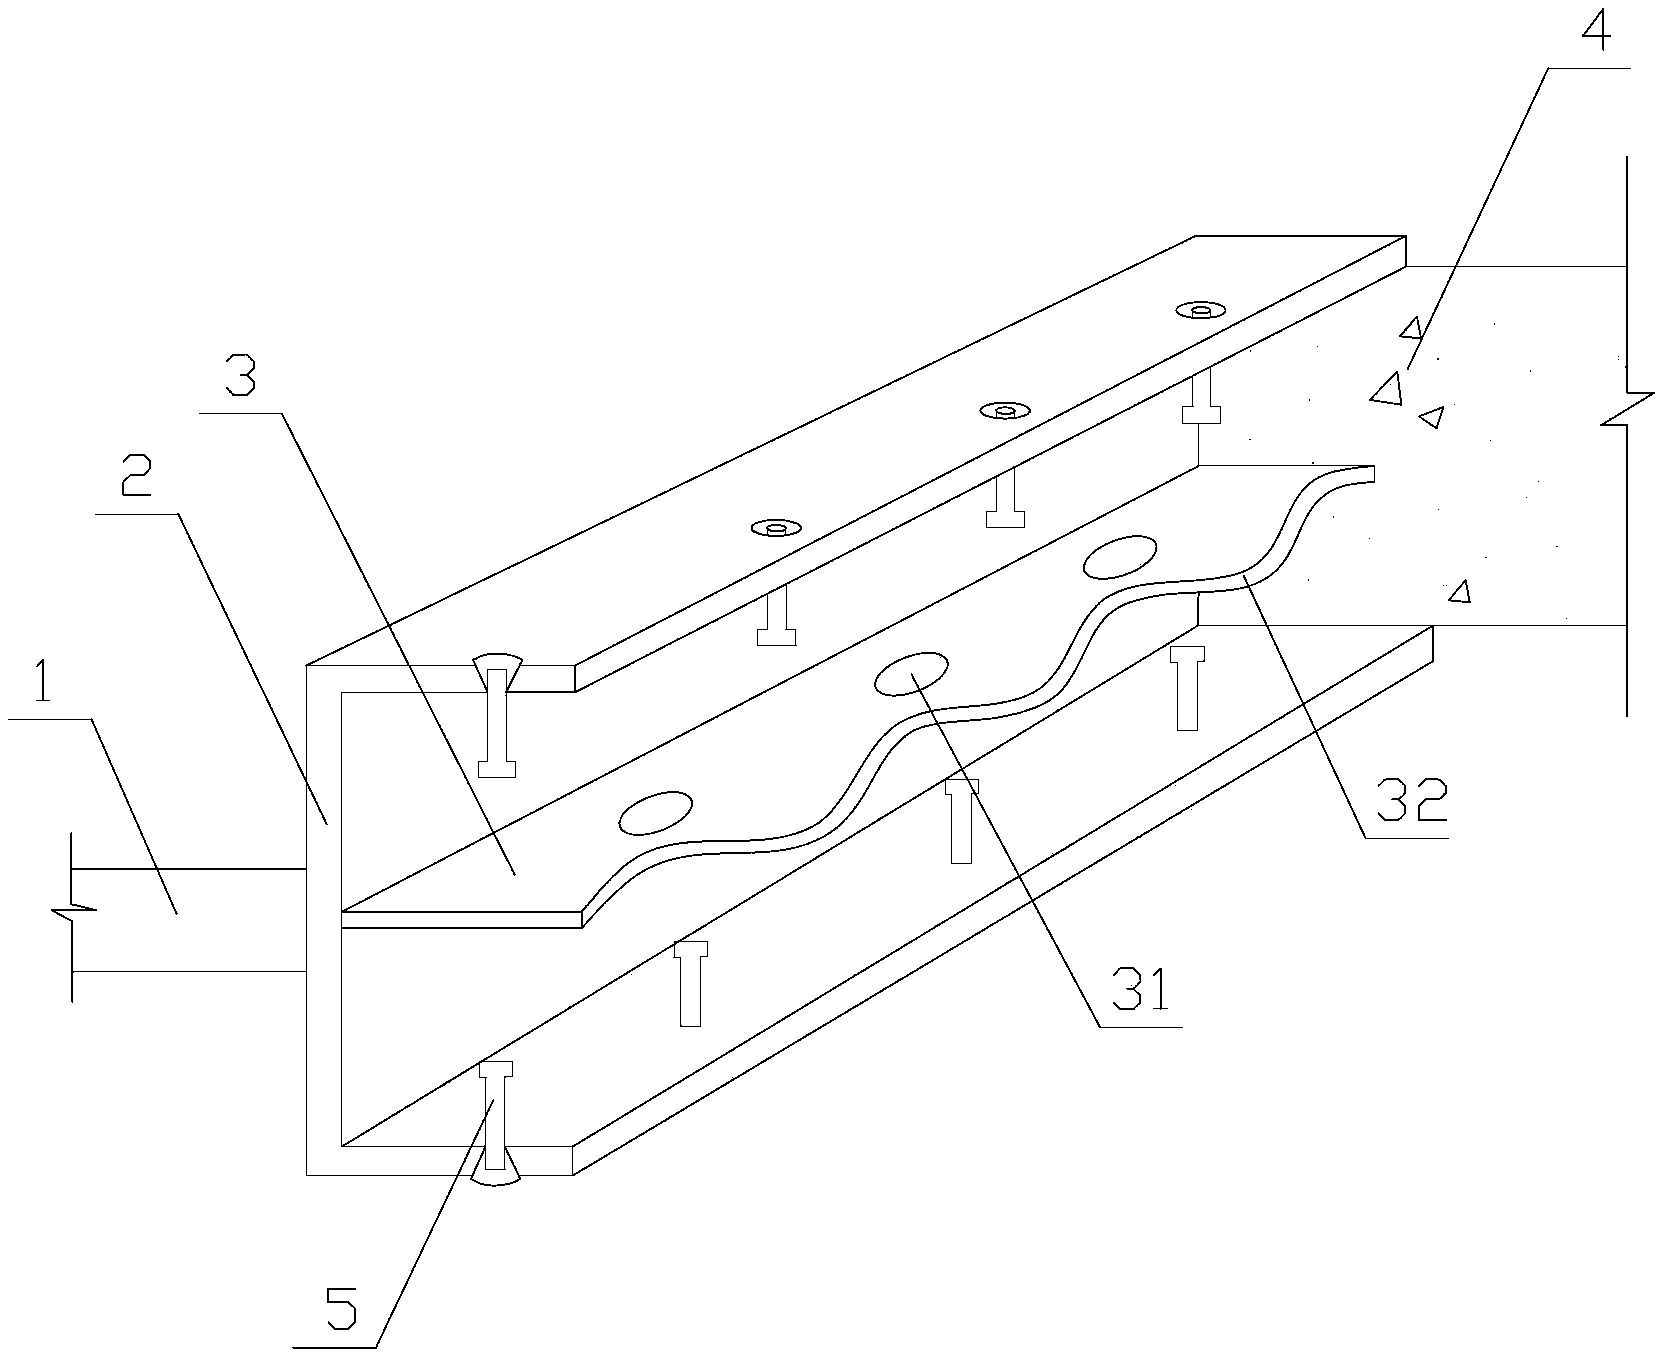 Corrugated sheet steel shear wall provided with slot type connecting key